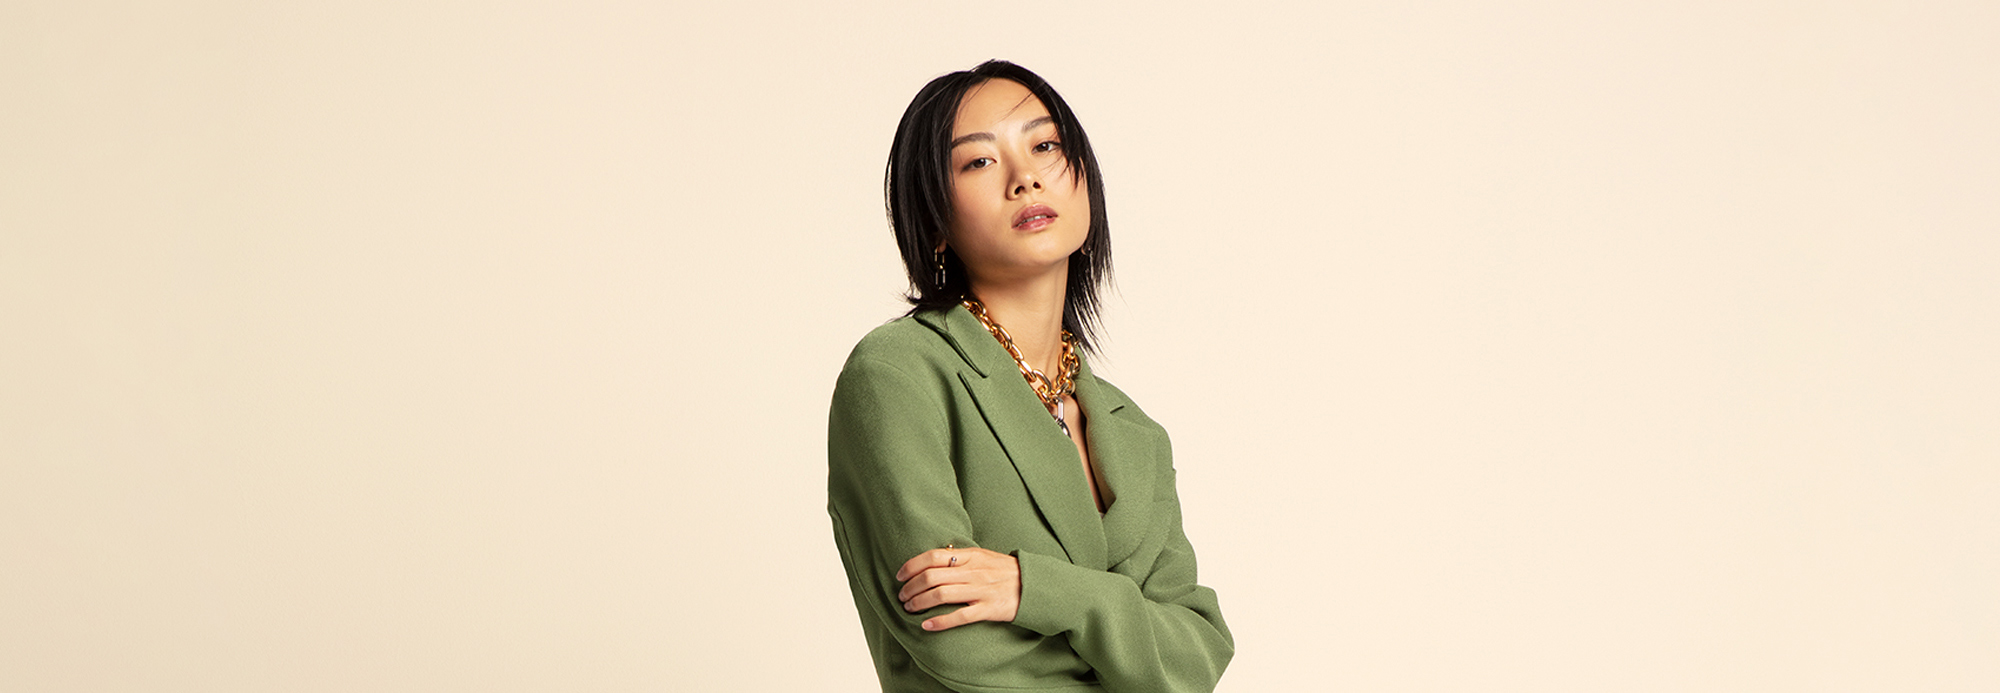 A young woman wearing a green blazer and statement necklace